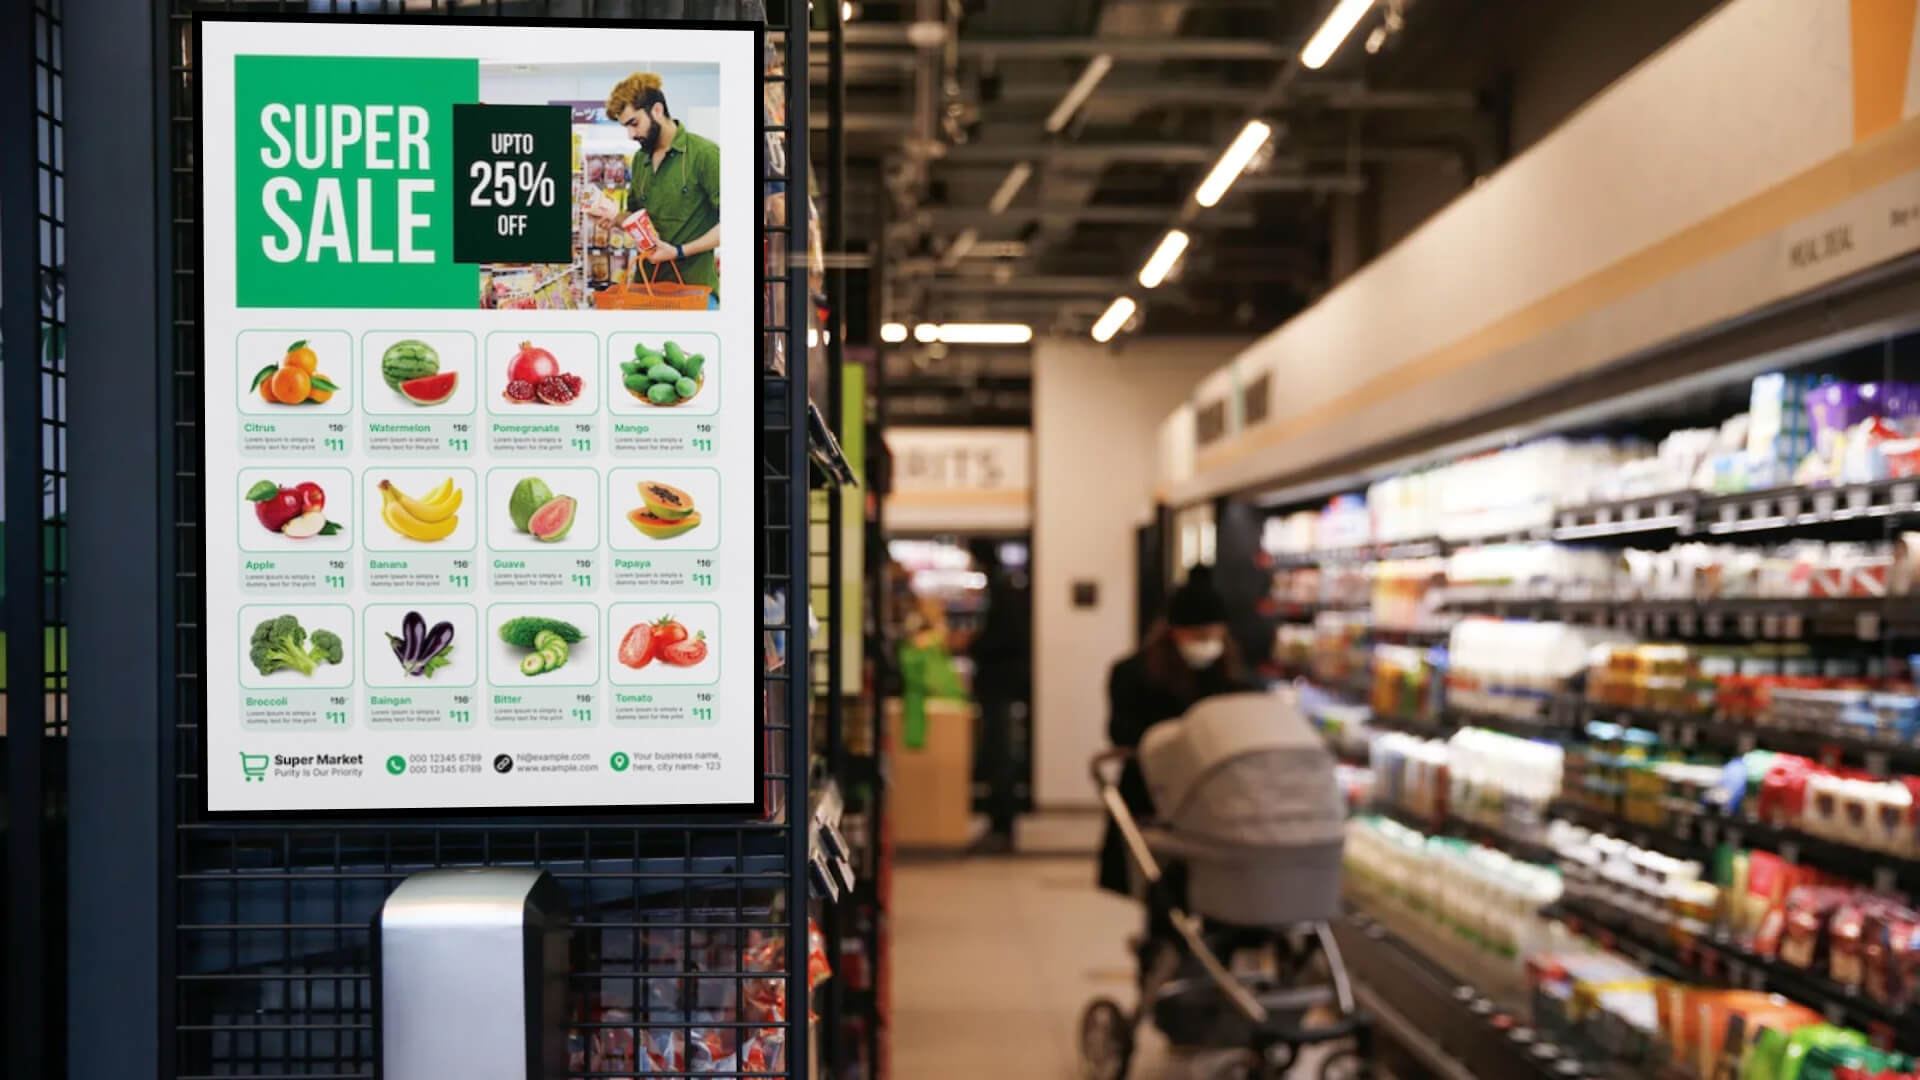  Grocery markets using AI for dynamic pricing and inventory management.